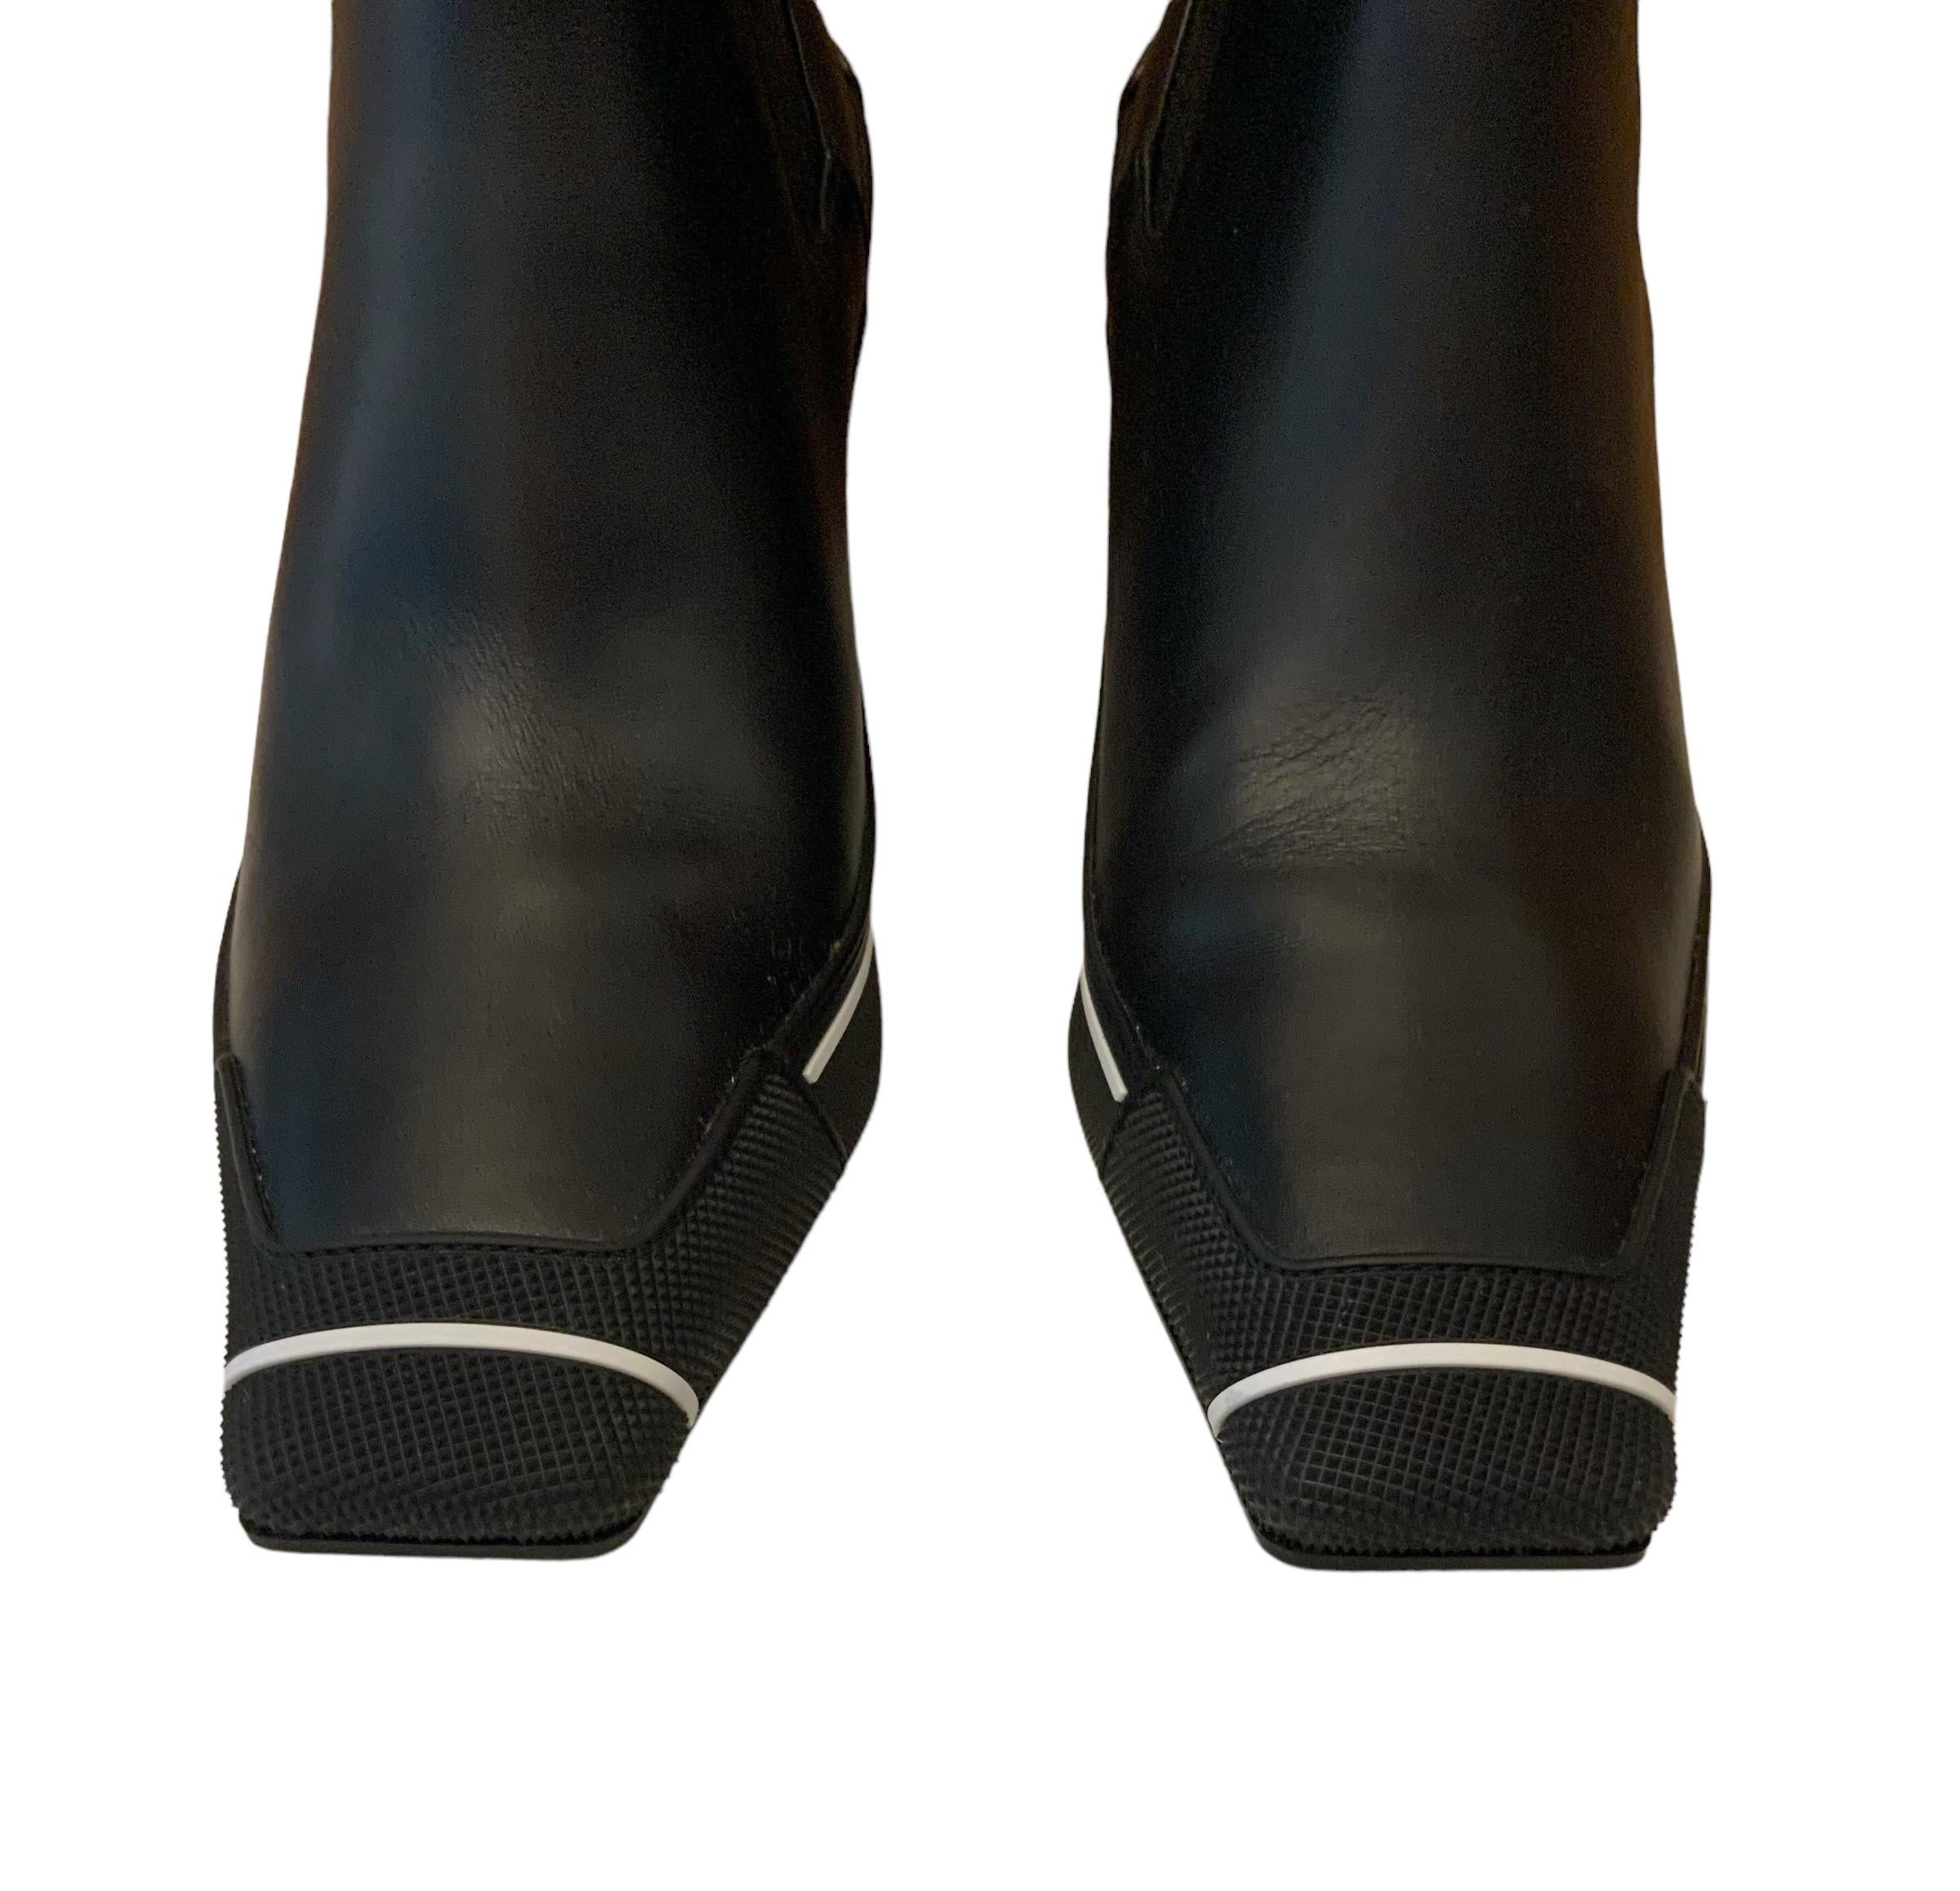 dior chelsea boots